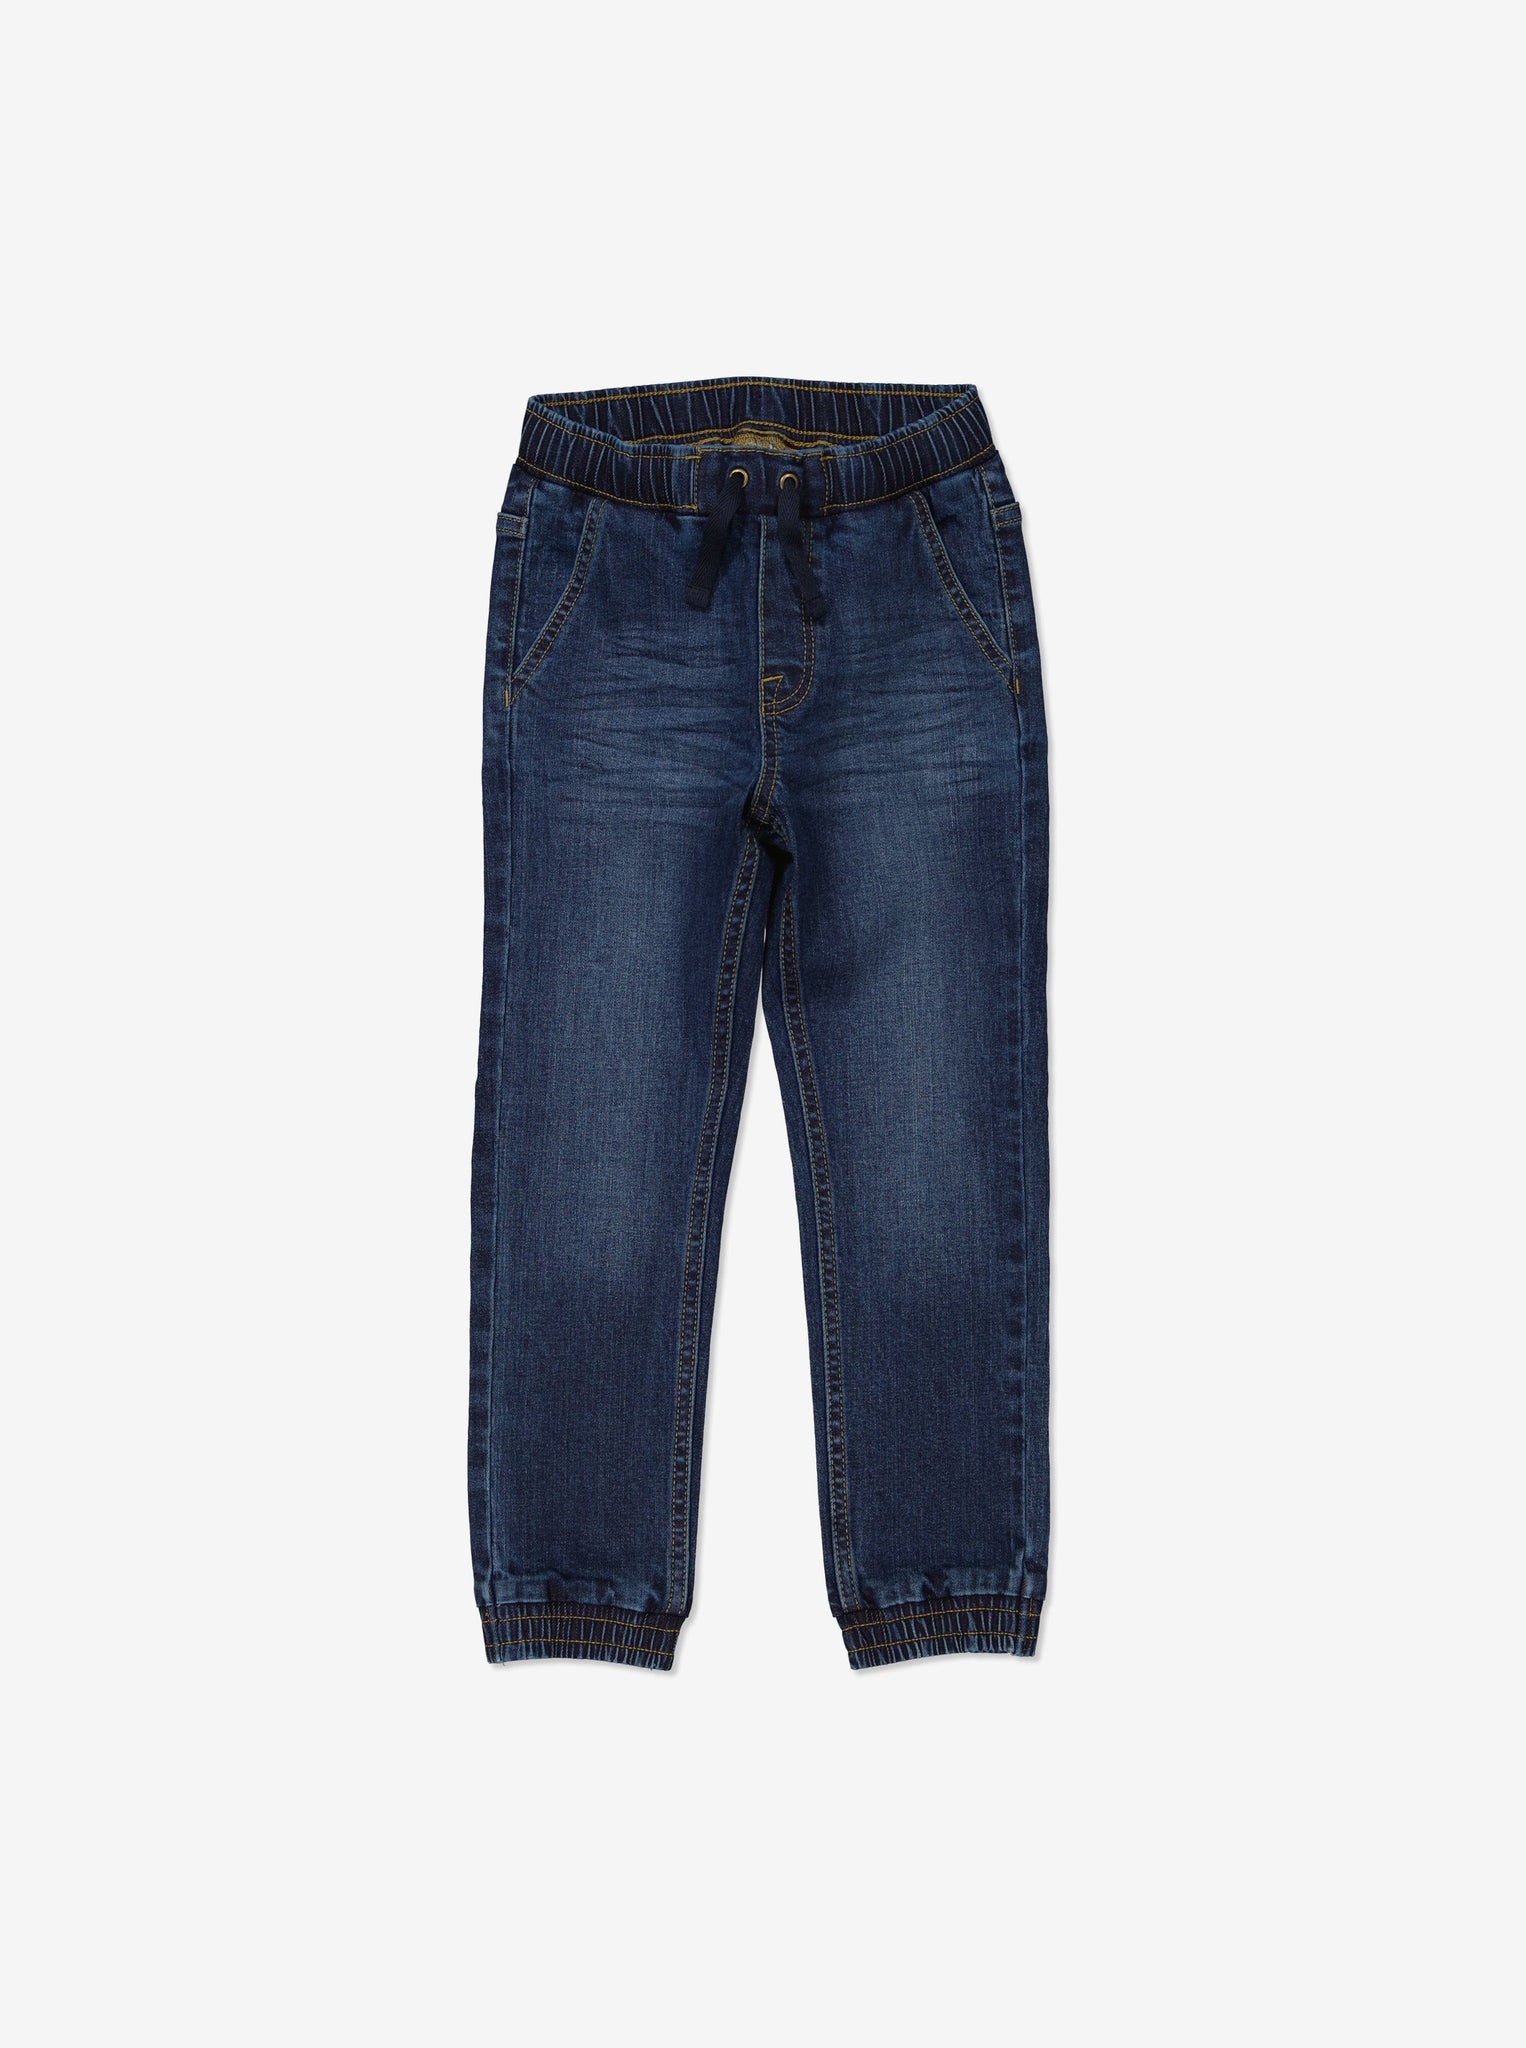  Organic Loose Fit Kids Denim Jeans from Polarn O. Pyret Kidswear. Made from environmentally friendly materials.